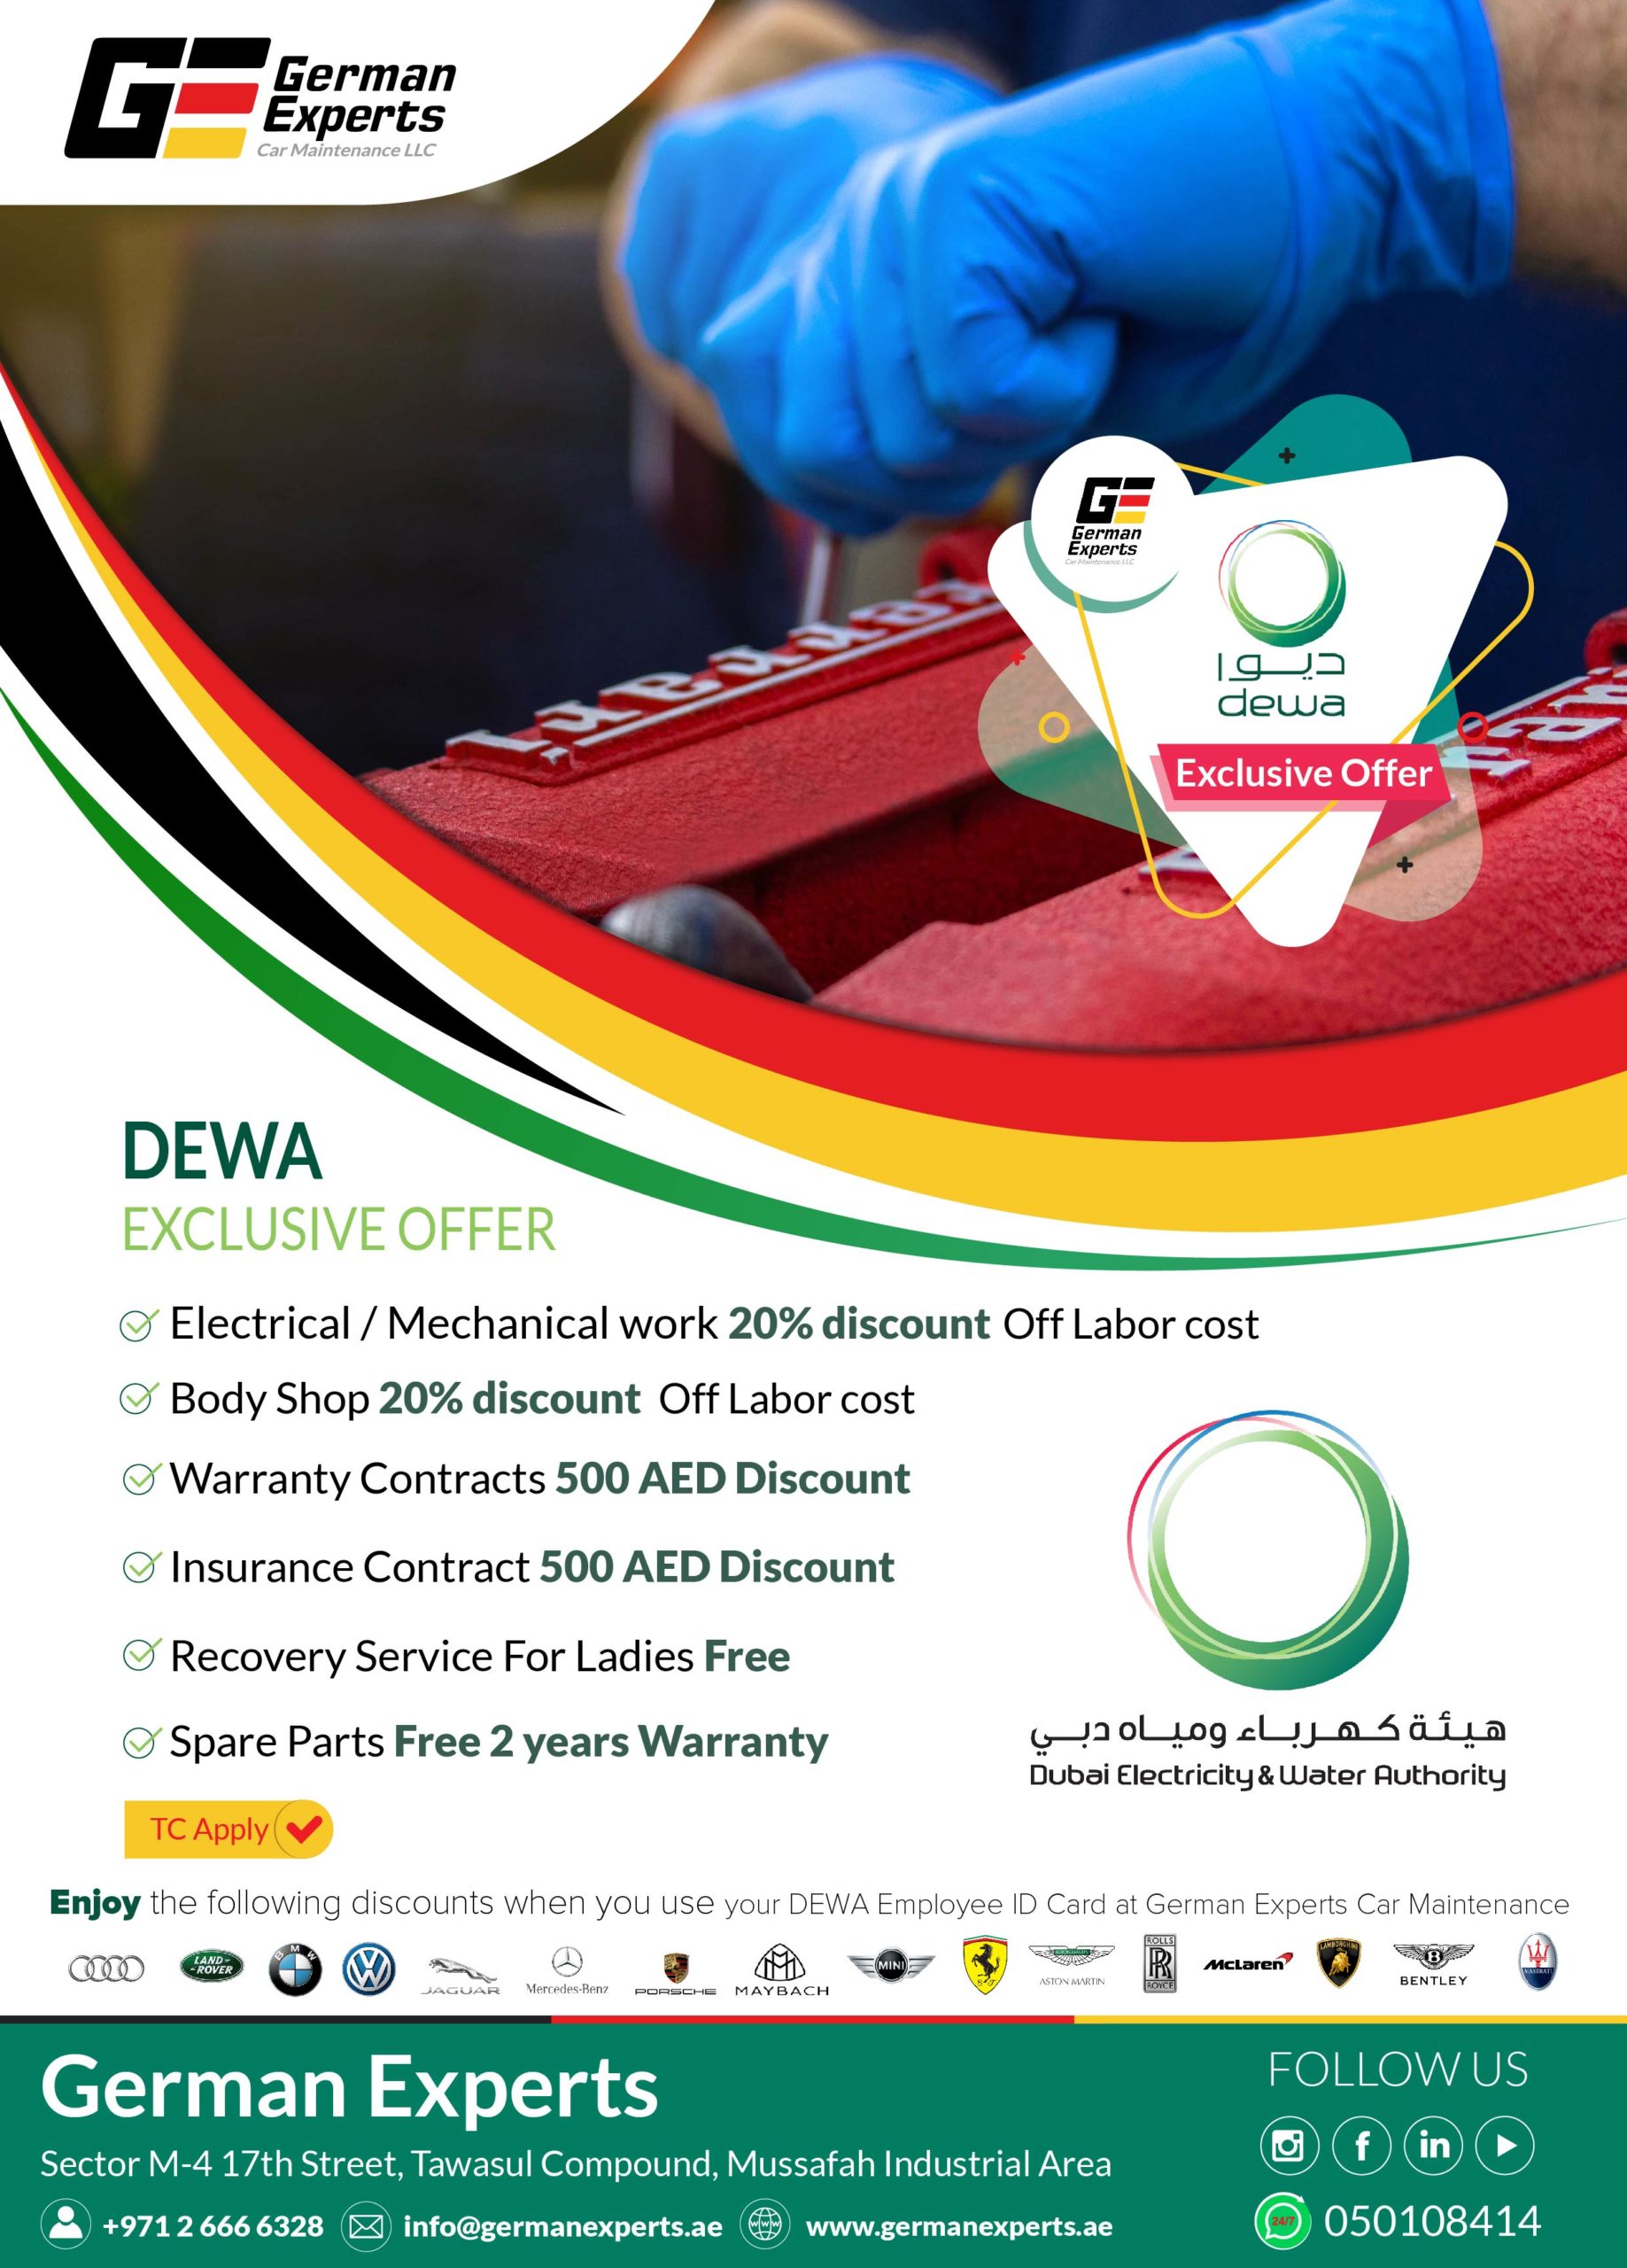 German Experts and DEWA special offer 